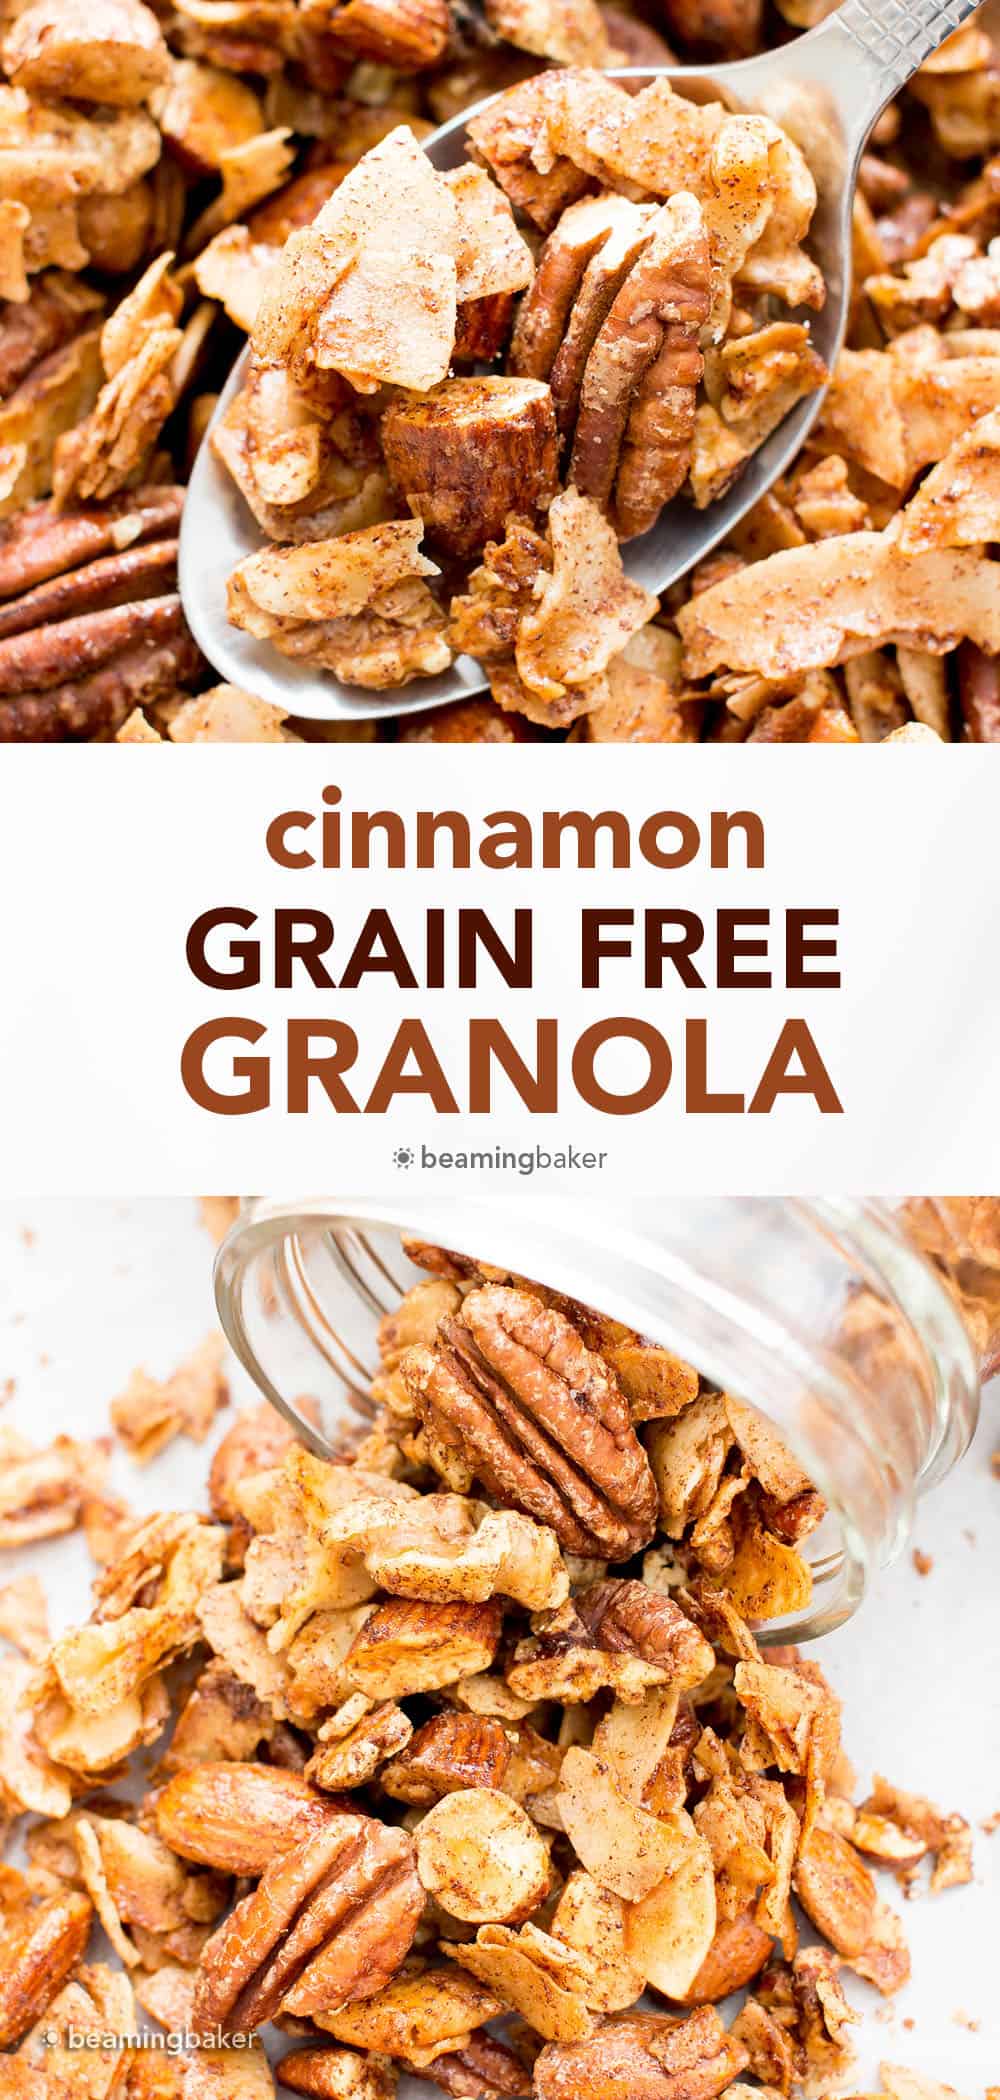 Cinnamon Grain Free Granola: my favorite grain free granola recipe—simple & easy to make granola that yields crispy, crunchy clusters and perfectly spiced, cozy cinnamon flavor. The best grain free granola! #GrainFree #Granola #HomemadeGranola | Recipe at BeamingBaker.com